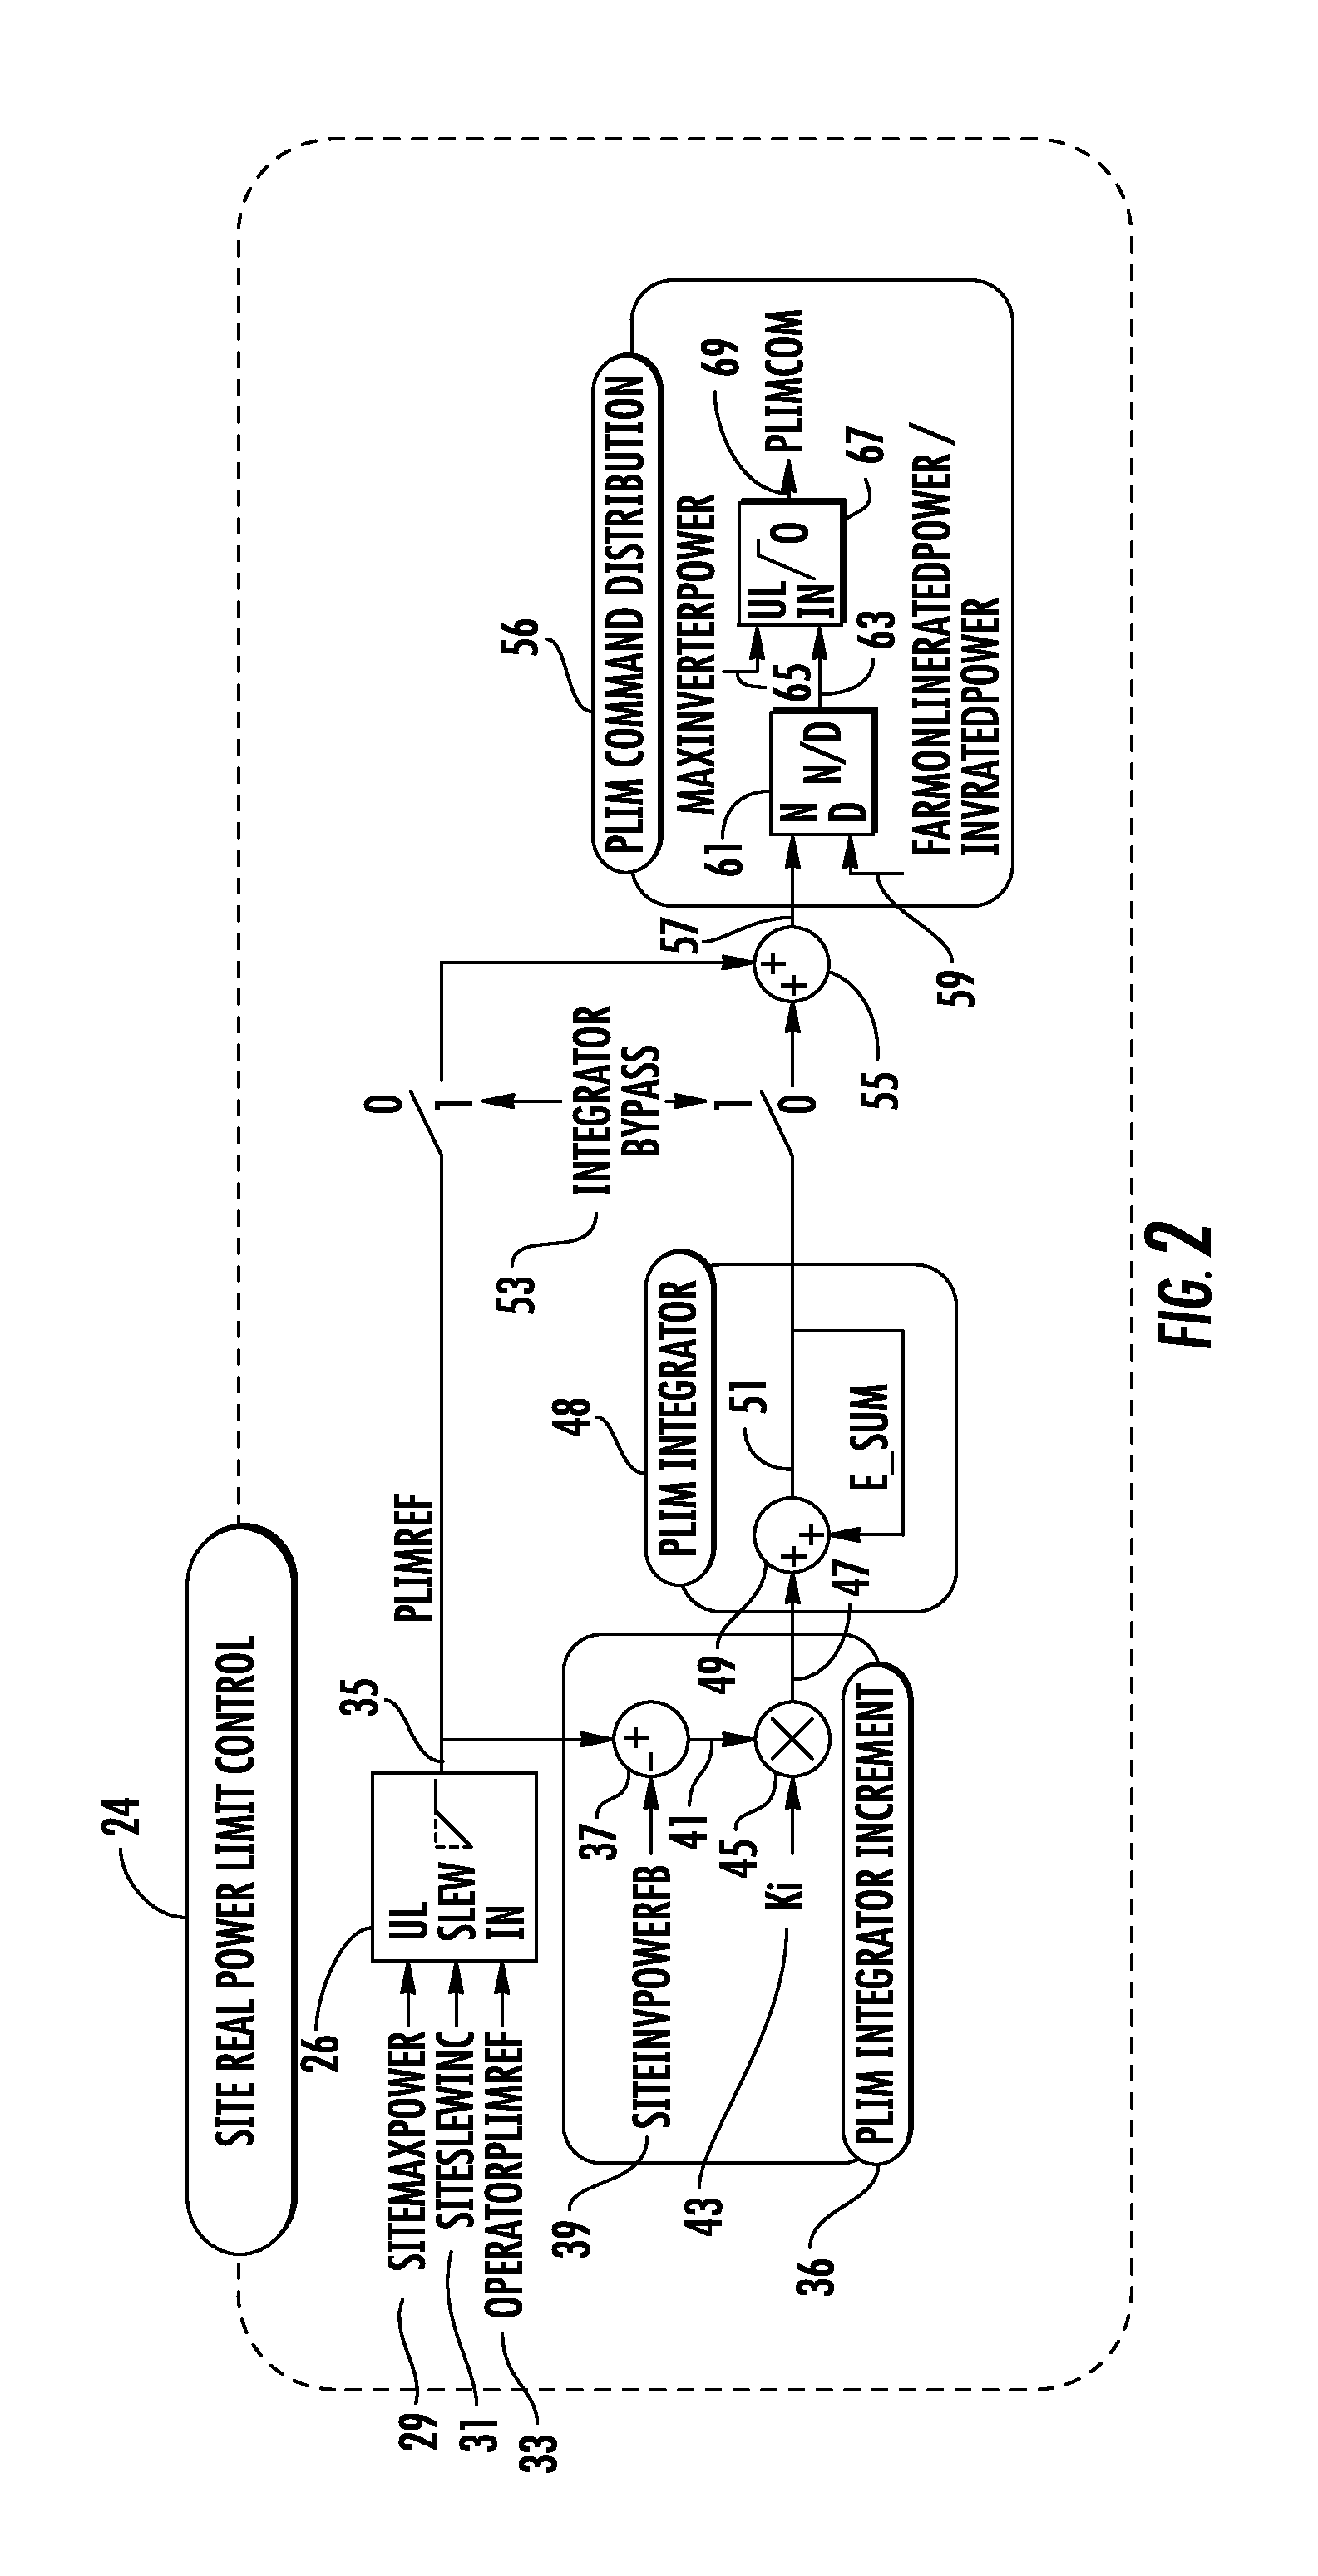 Methods, systems, computer program products, and devices for renewable energy site power limit control